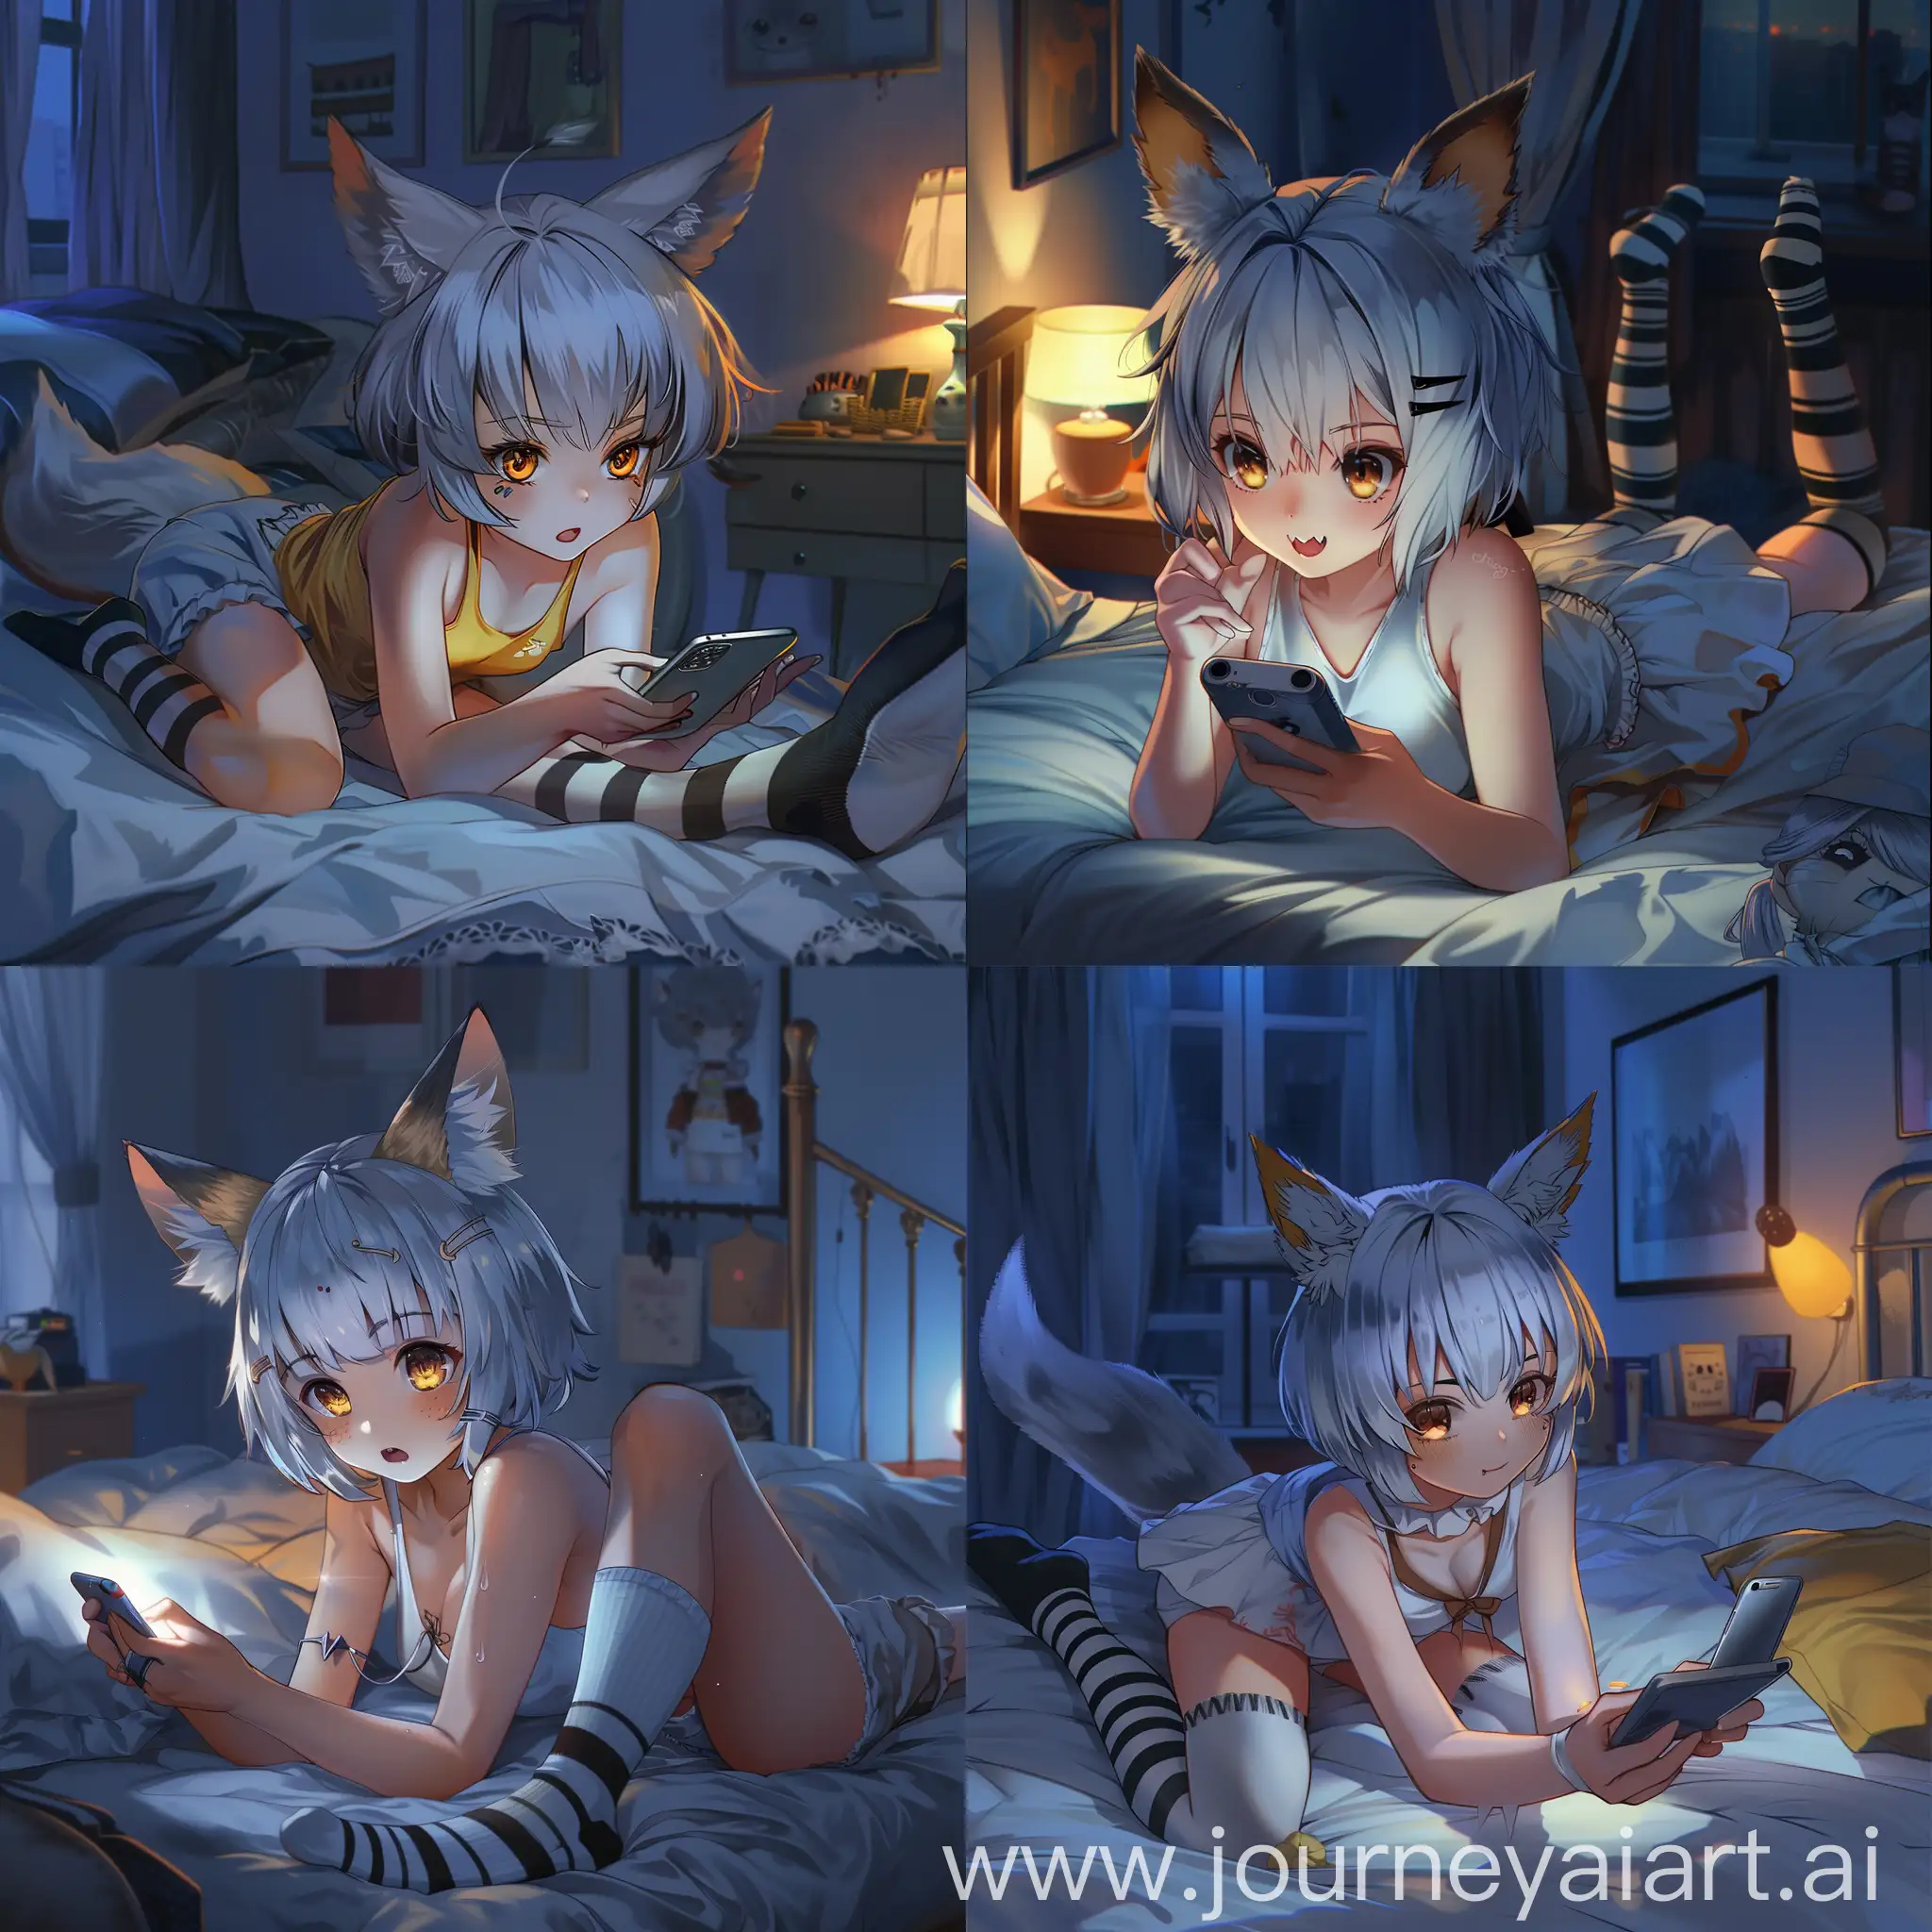 Cute girl with short silver hair and fox ears, lying on her bed in the dark bedroom at night playing an iPhone. She wore socks with black stripes over white tights, with brown eyes and golden yellow irises, showing sharp fangs in a mischievous expression. Her slender body and cute face had beautifully detailed fantasycore features, rendered in a photorealistic style , realistic art 